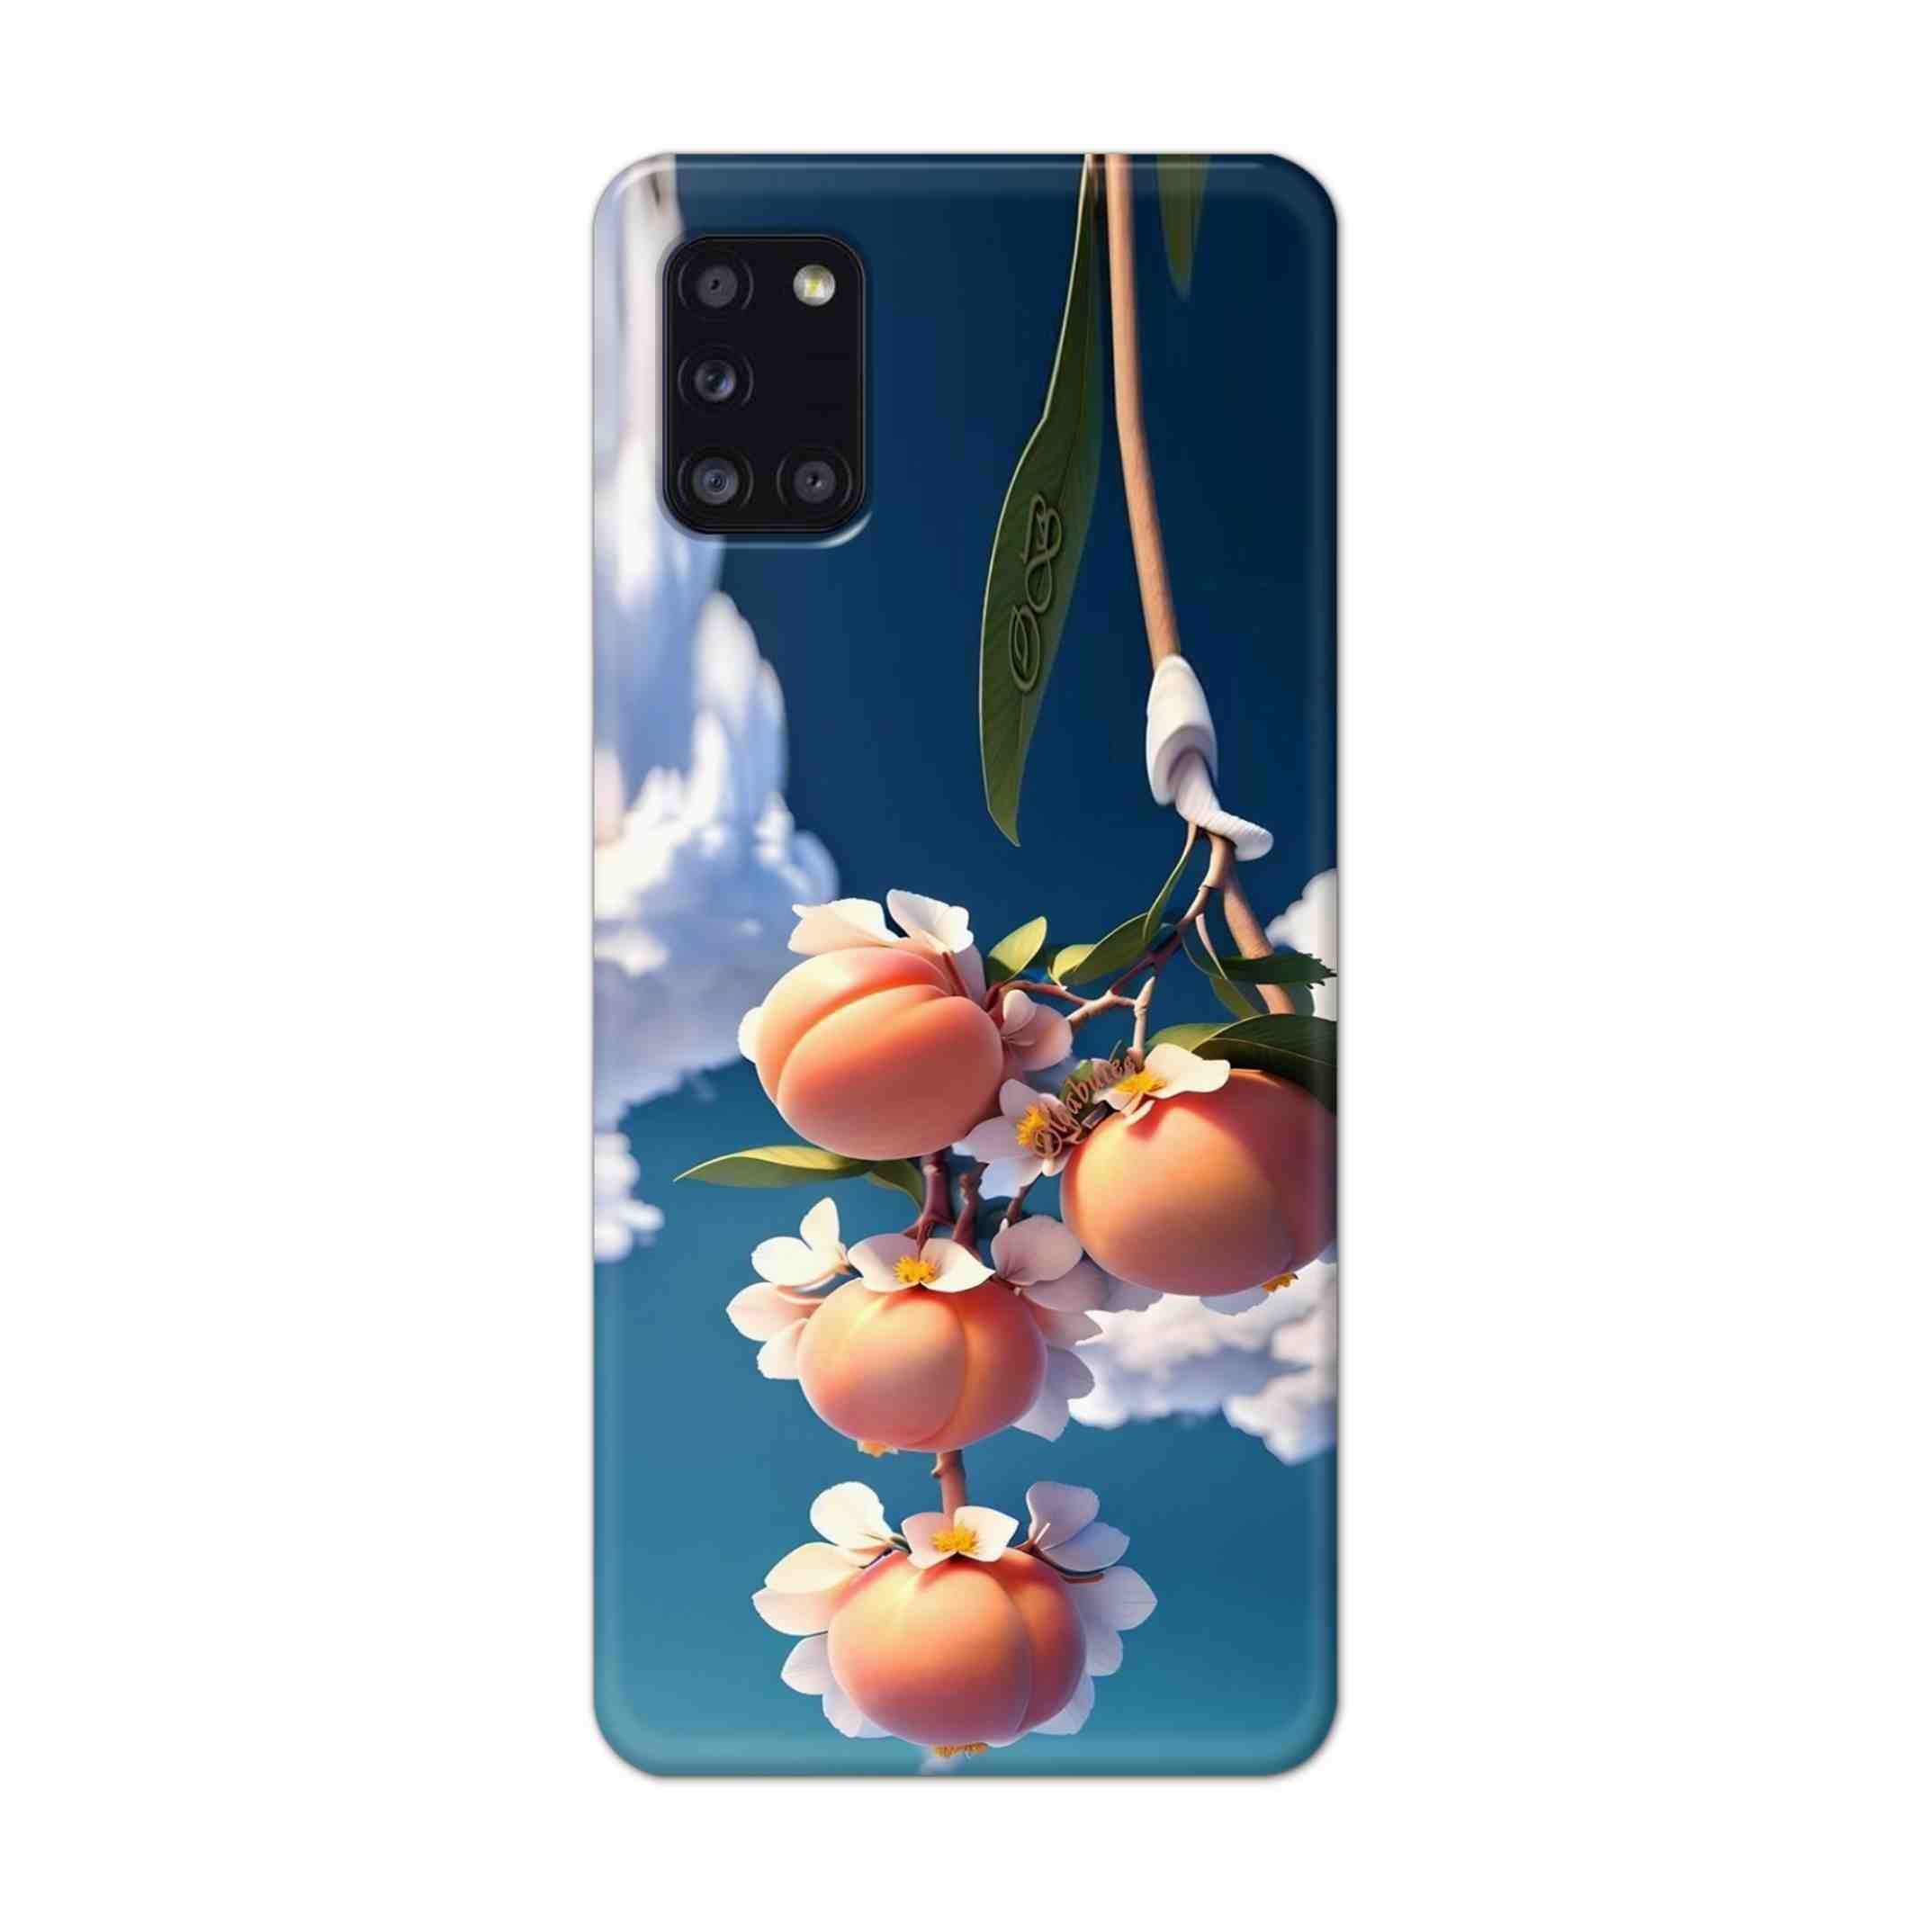 Buy Fruit Hard Back Mobile Phone Case Cover For Samsung Galaxy A31 Online